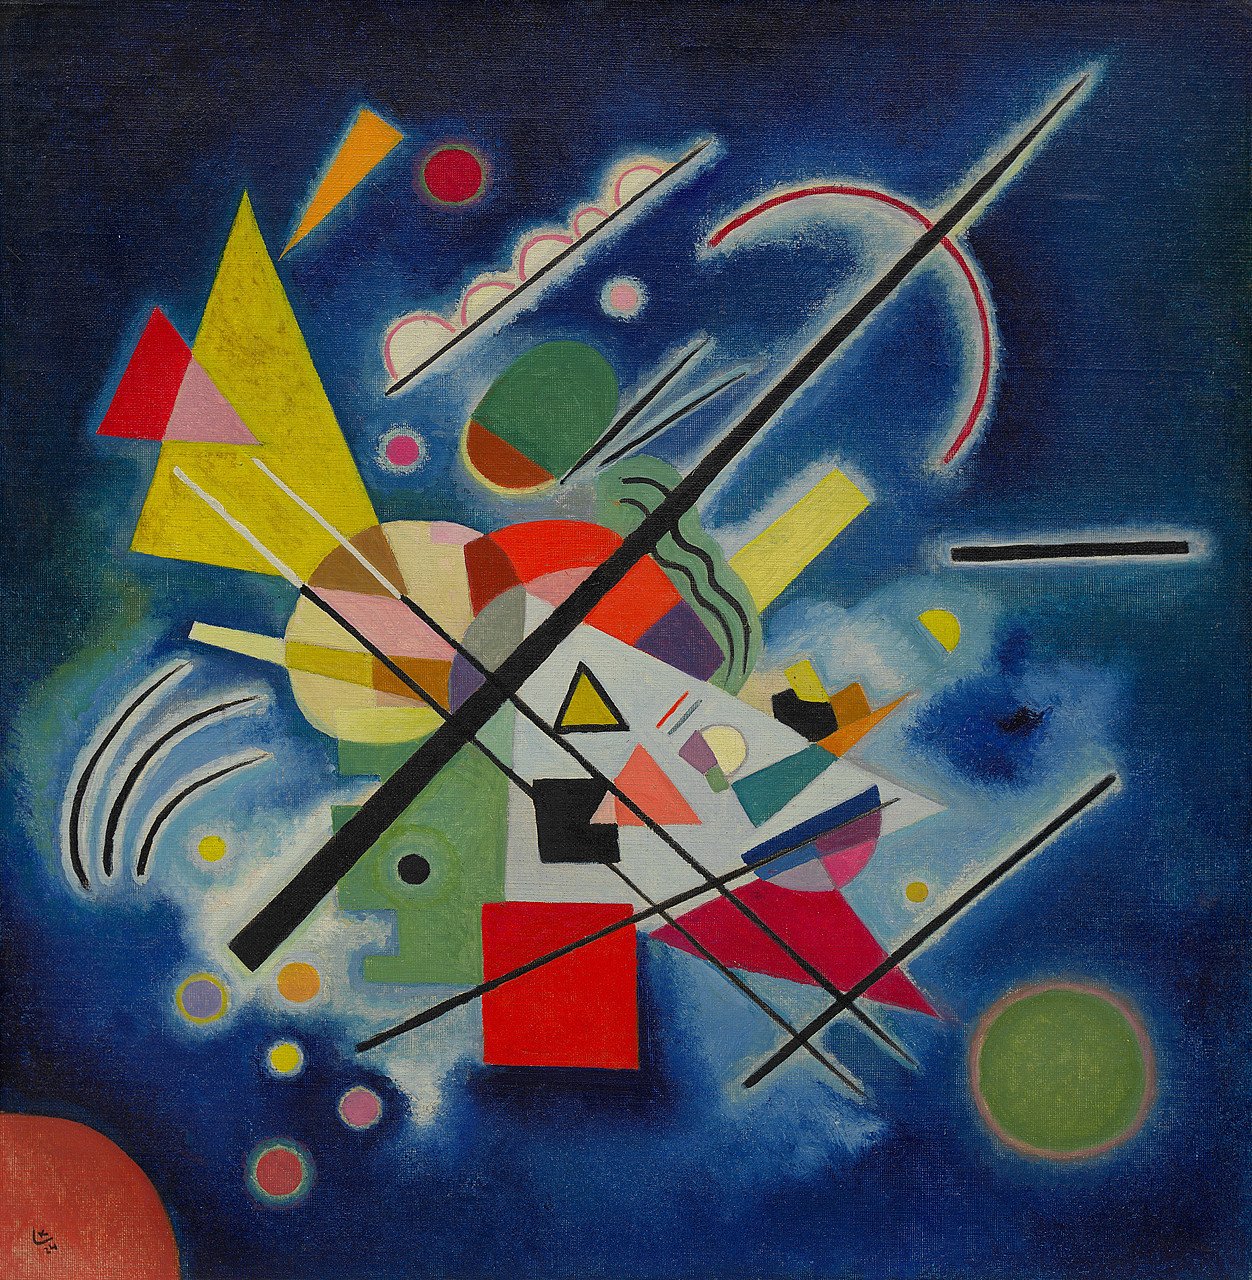 "Blue Painting (Blaues Bild)" by Vasily Kandinsky, 1924, features a cruciform composition with vibrant, abstract geometric shapes against a blue background.